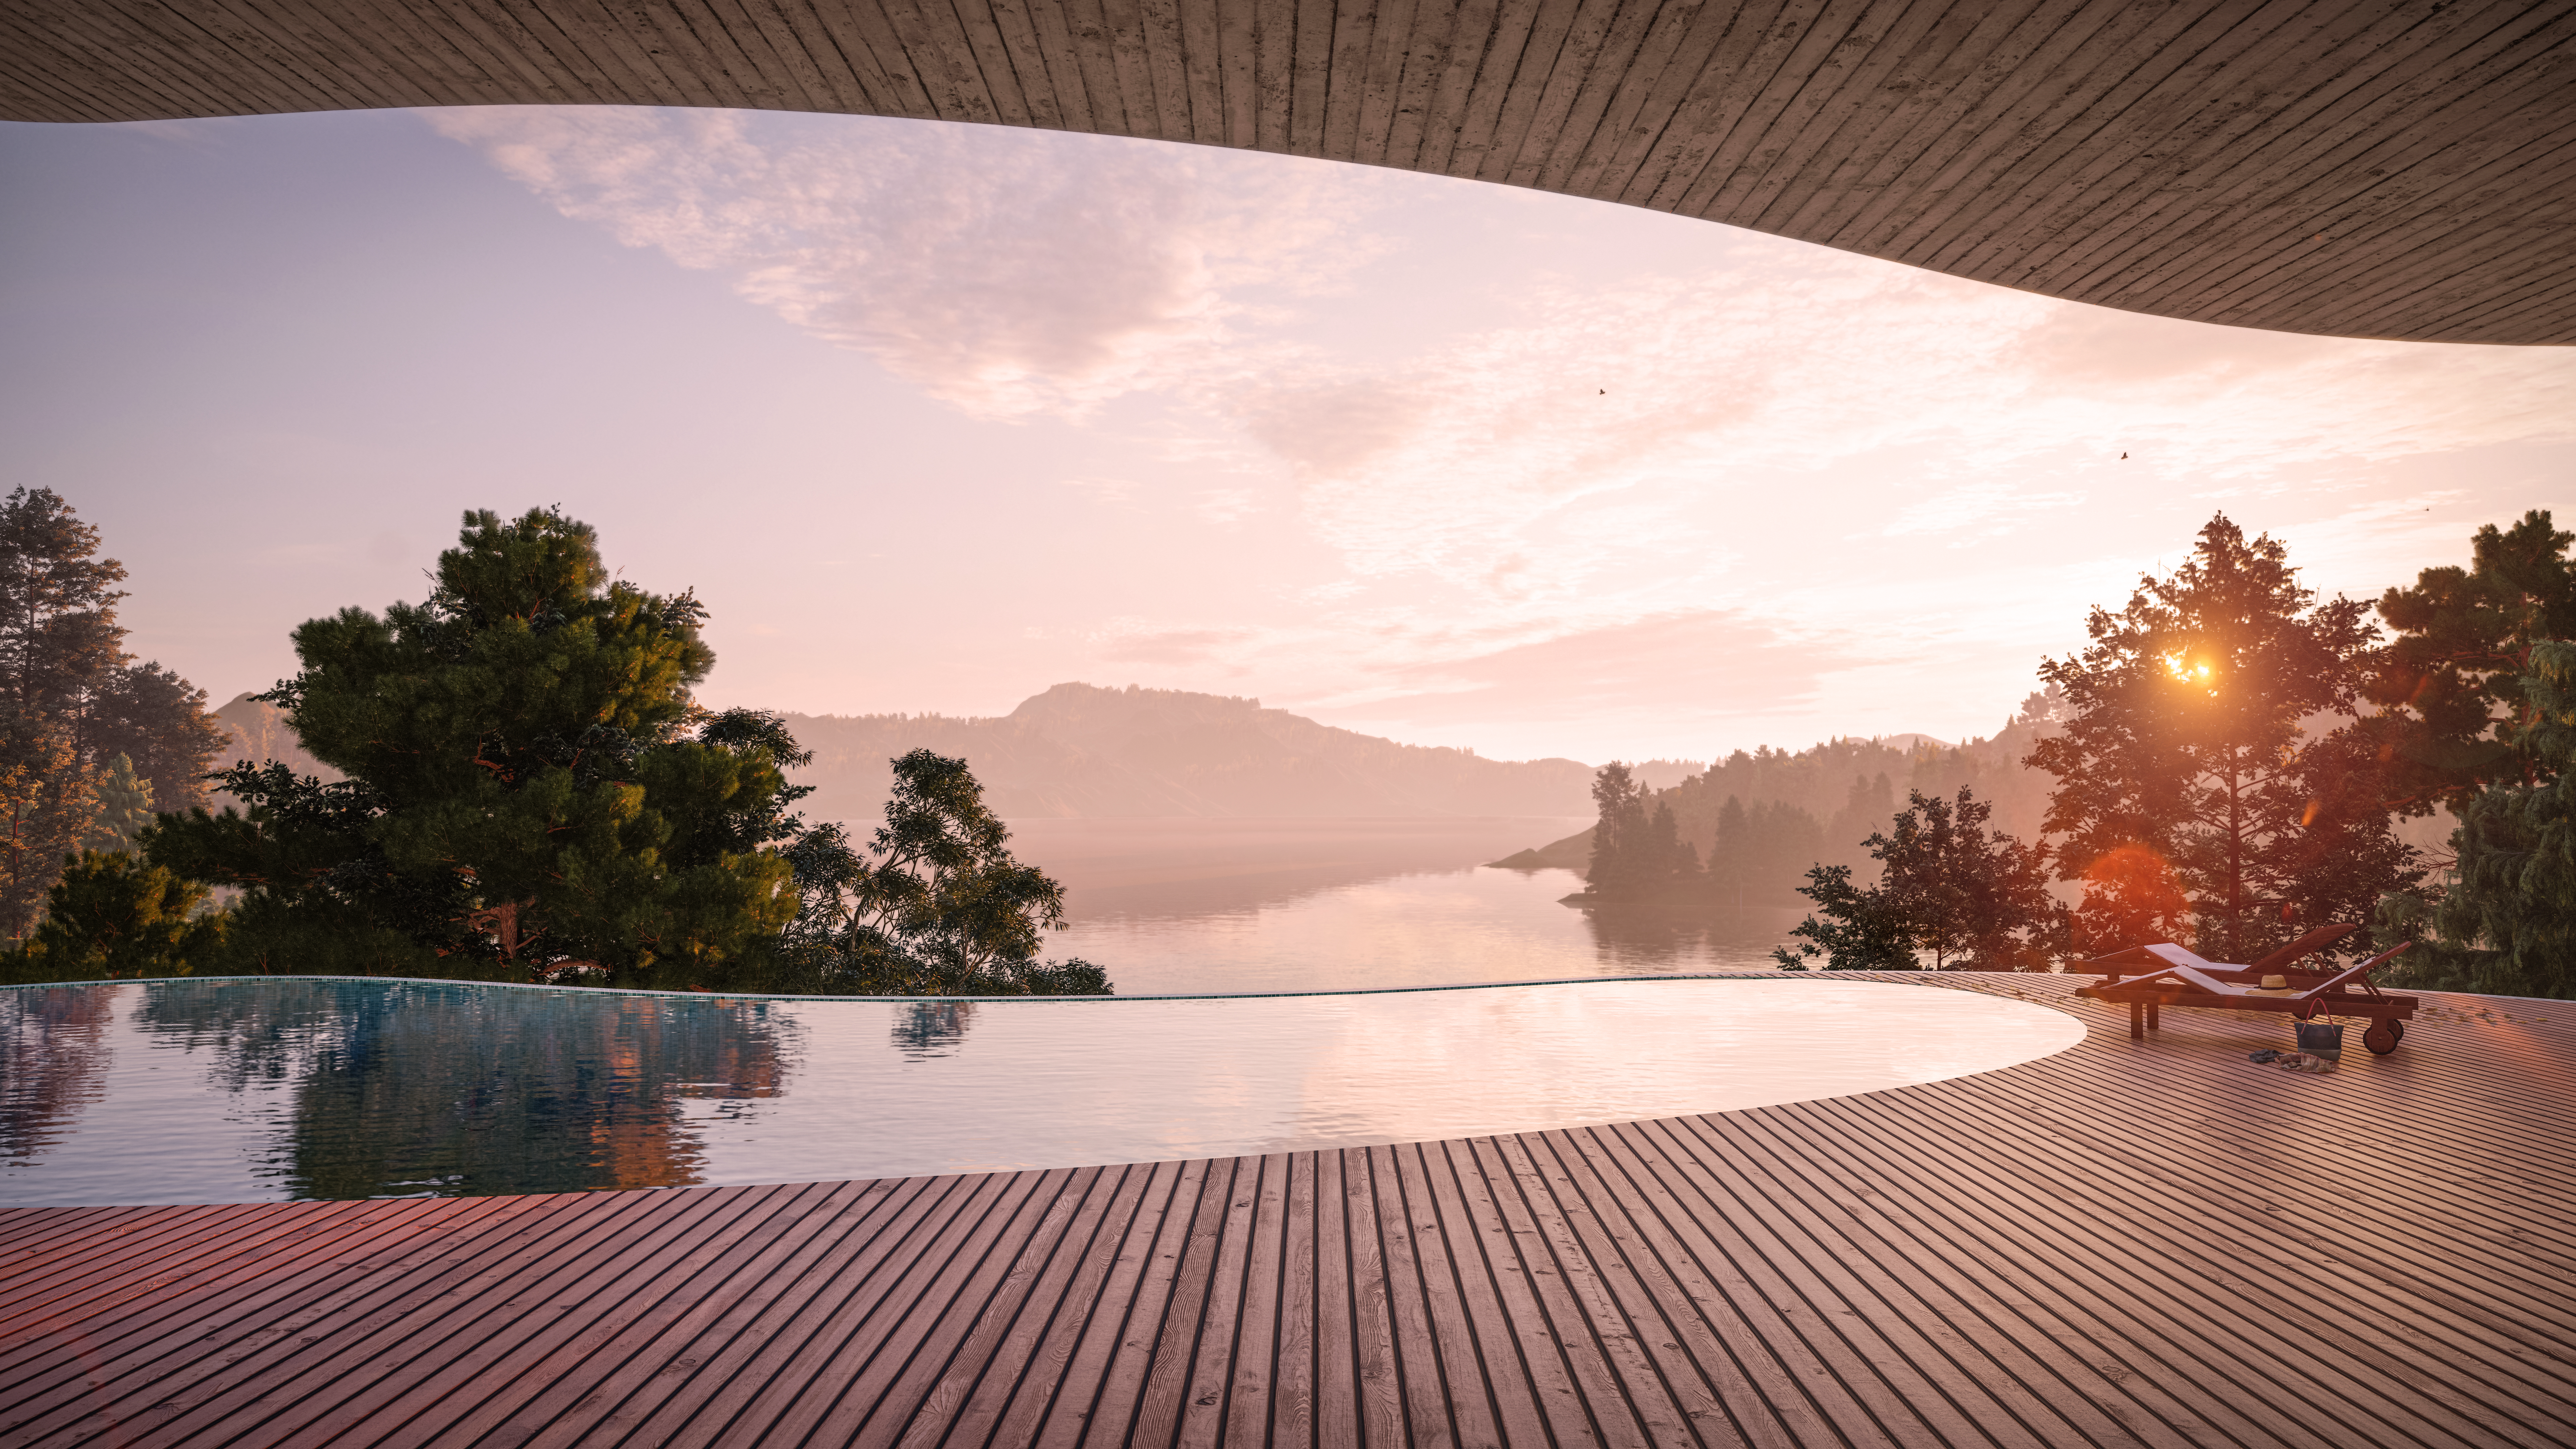 Wooden deck and awning overlooking infinity edge pool, trees, and mountains